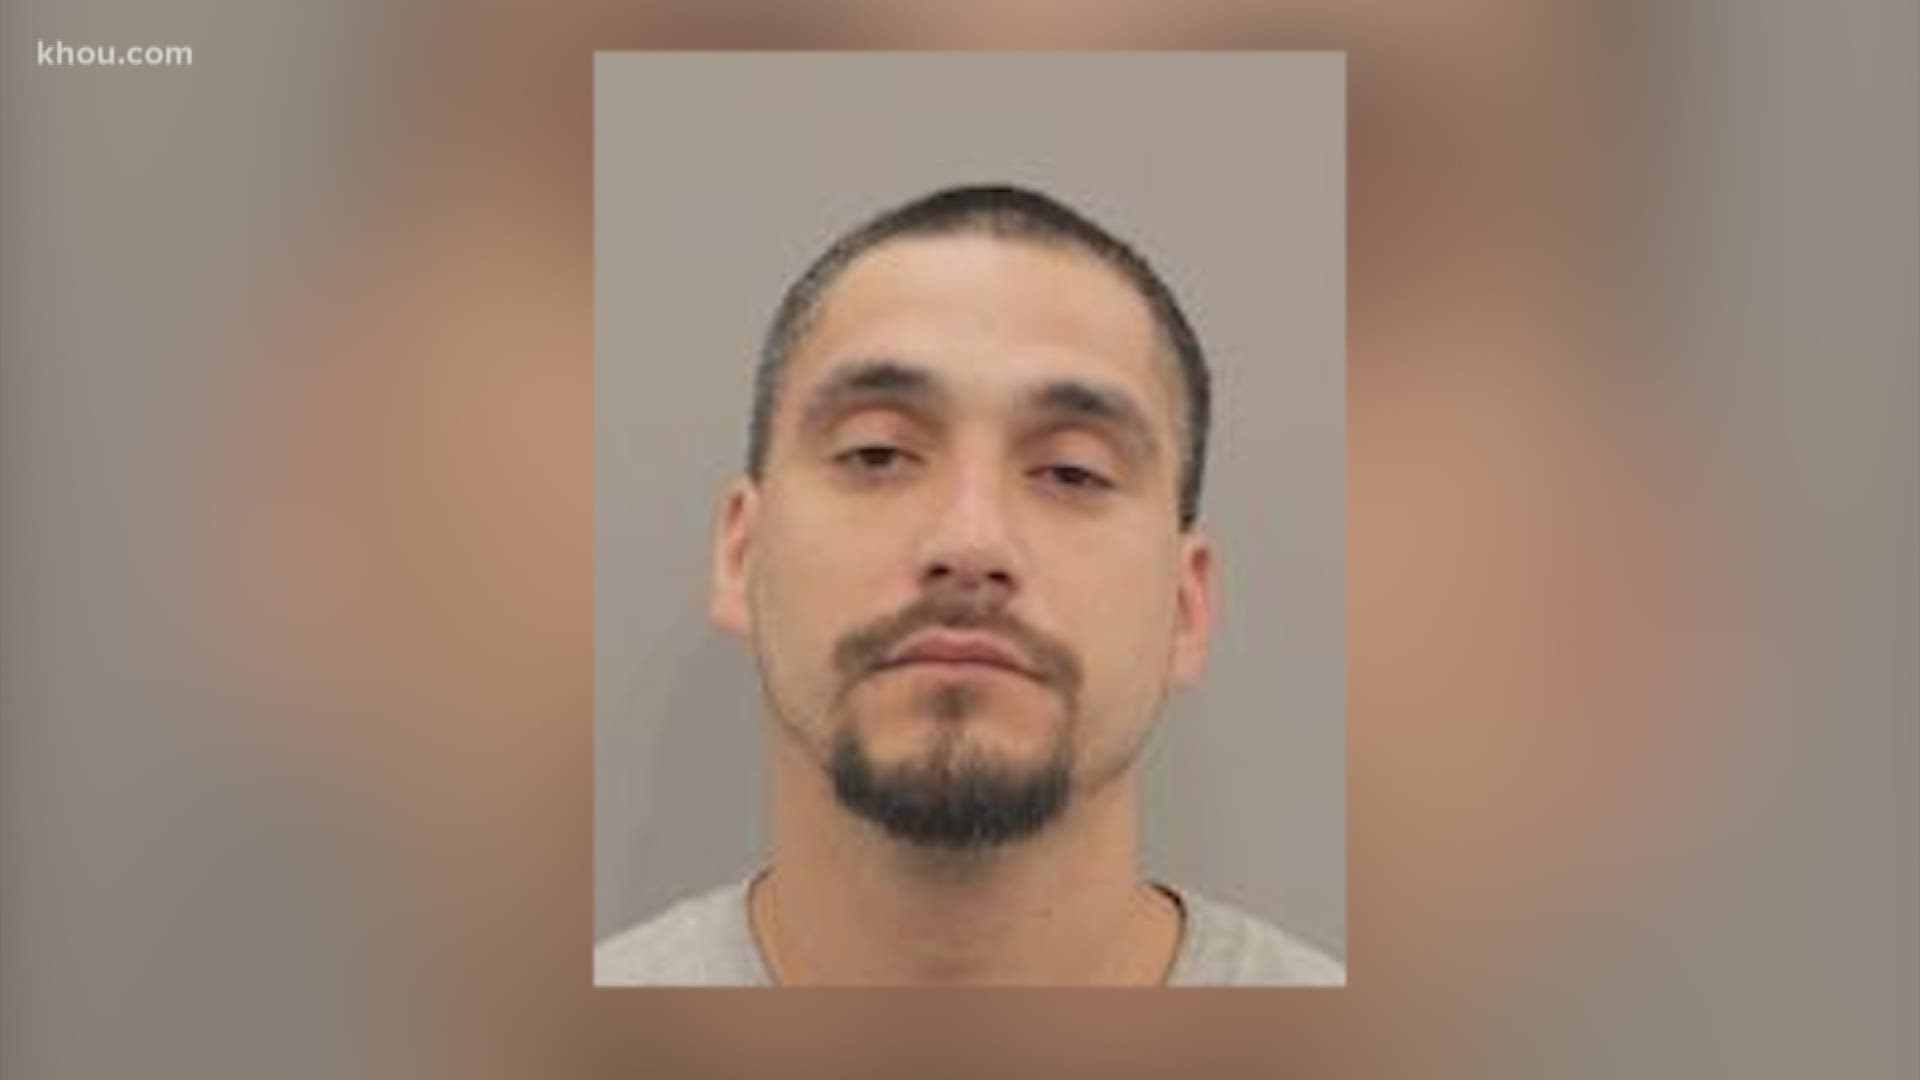 Houston police said they caught the man who stole a woman's purse in a H-E-B parking garage. Court records show the man was charged with several crimes in May, including burglary.